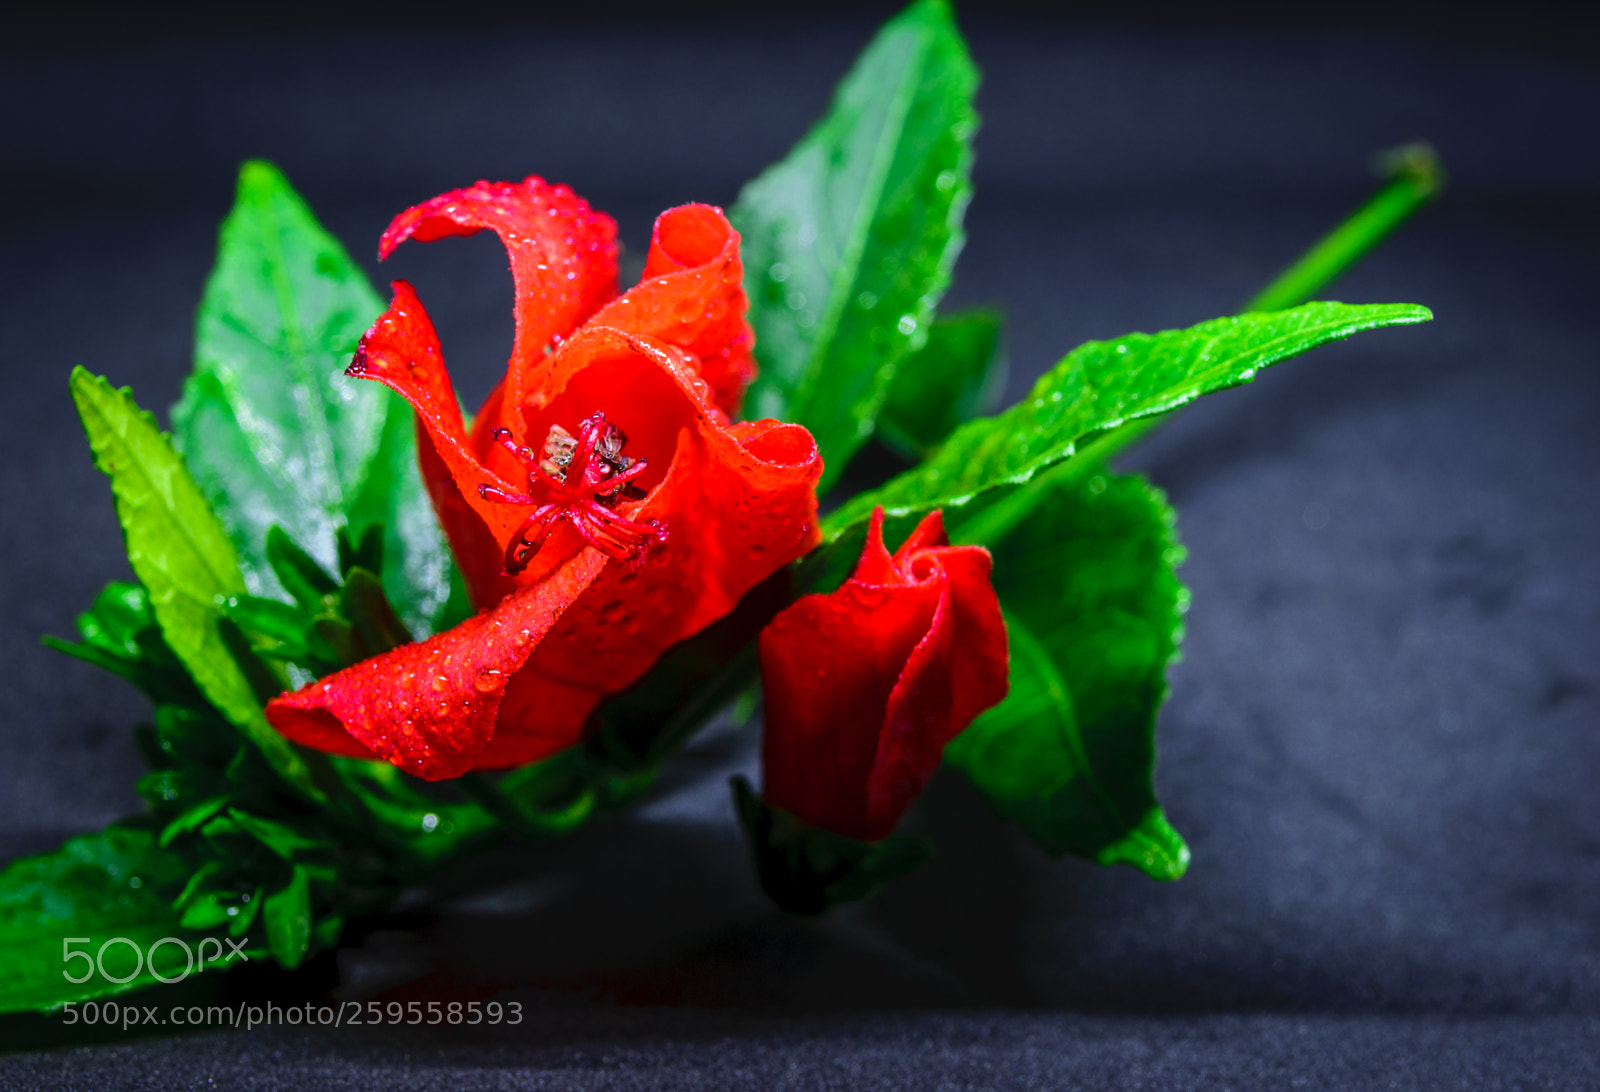 Nikon D5300 sample photo. Red flower photography